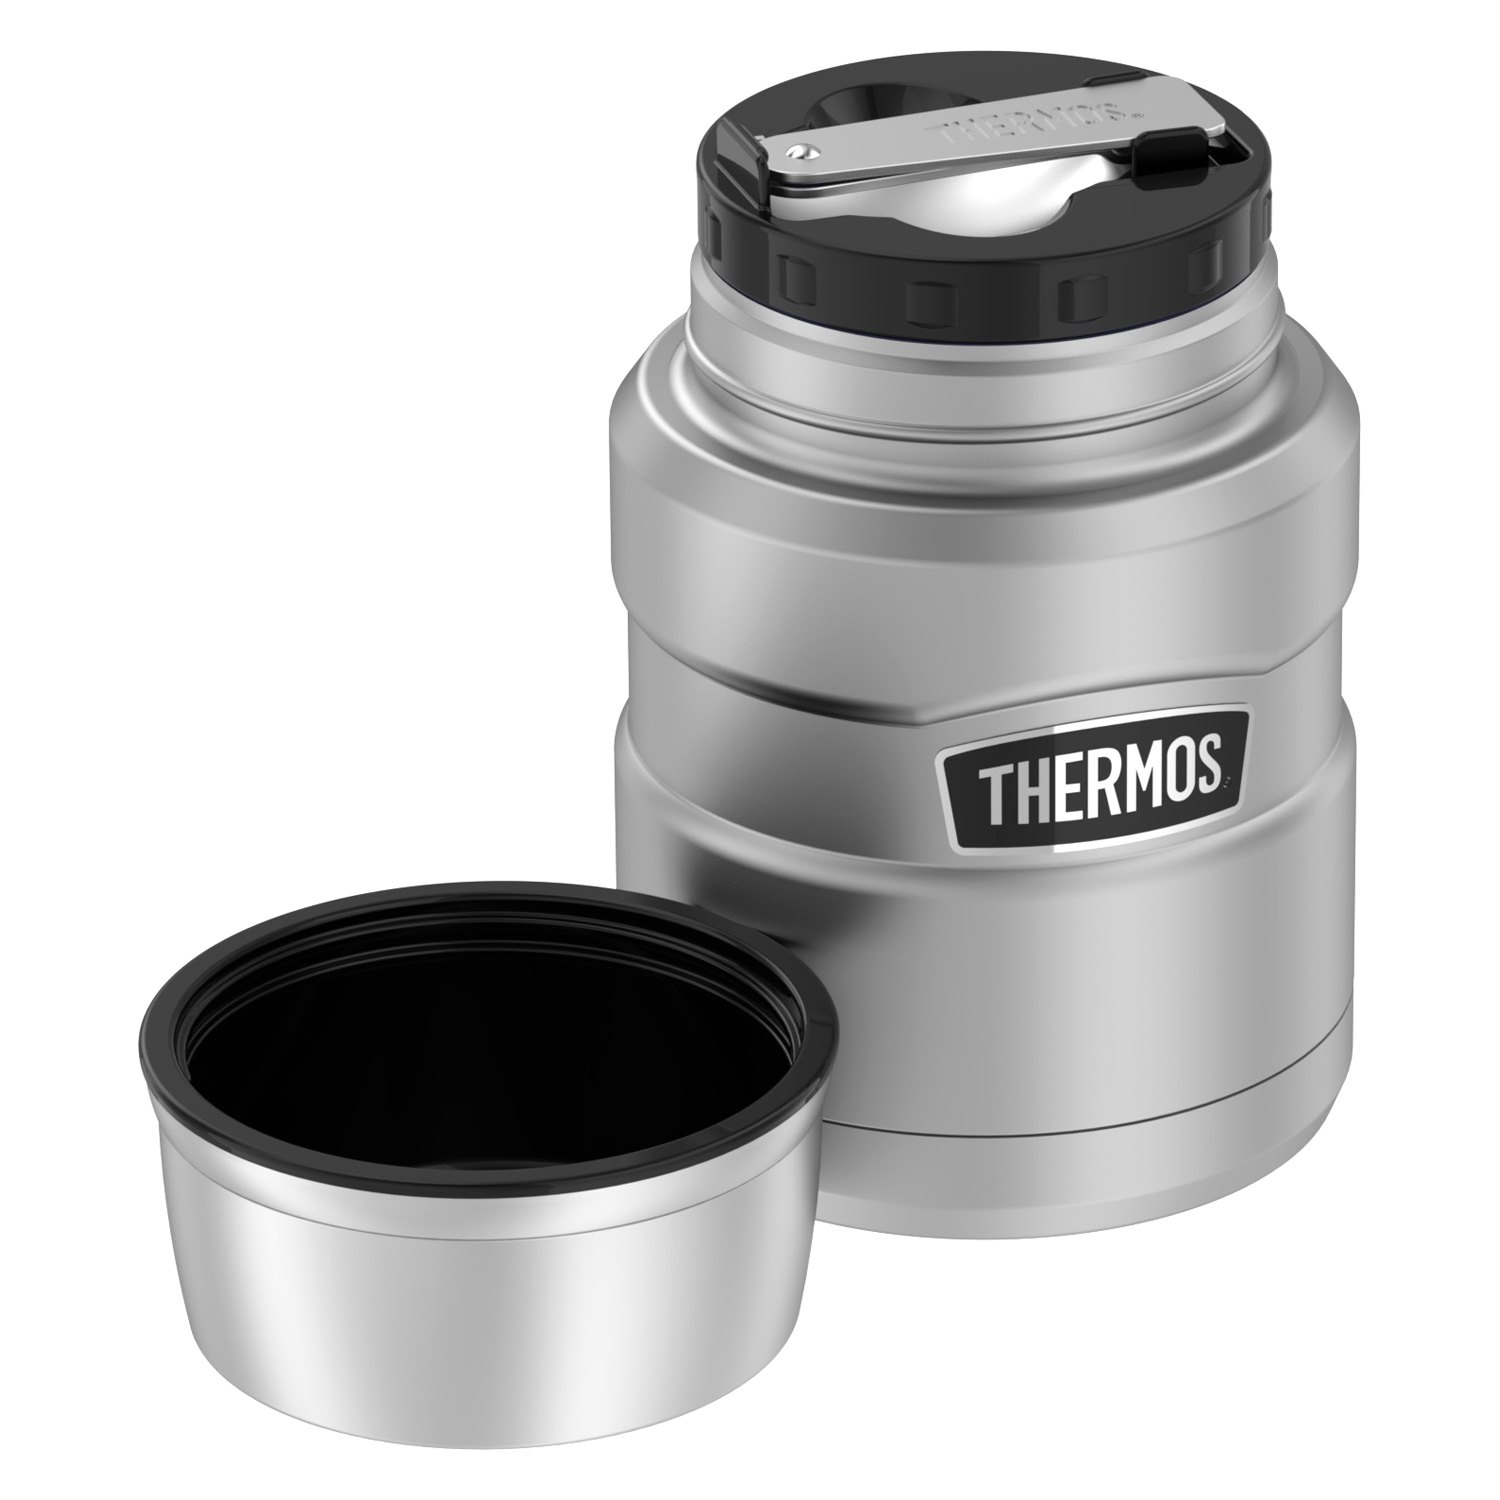 Thermos 16 oz. Vacuum Insulated Stainless Steel Food Jar w